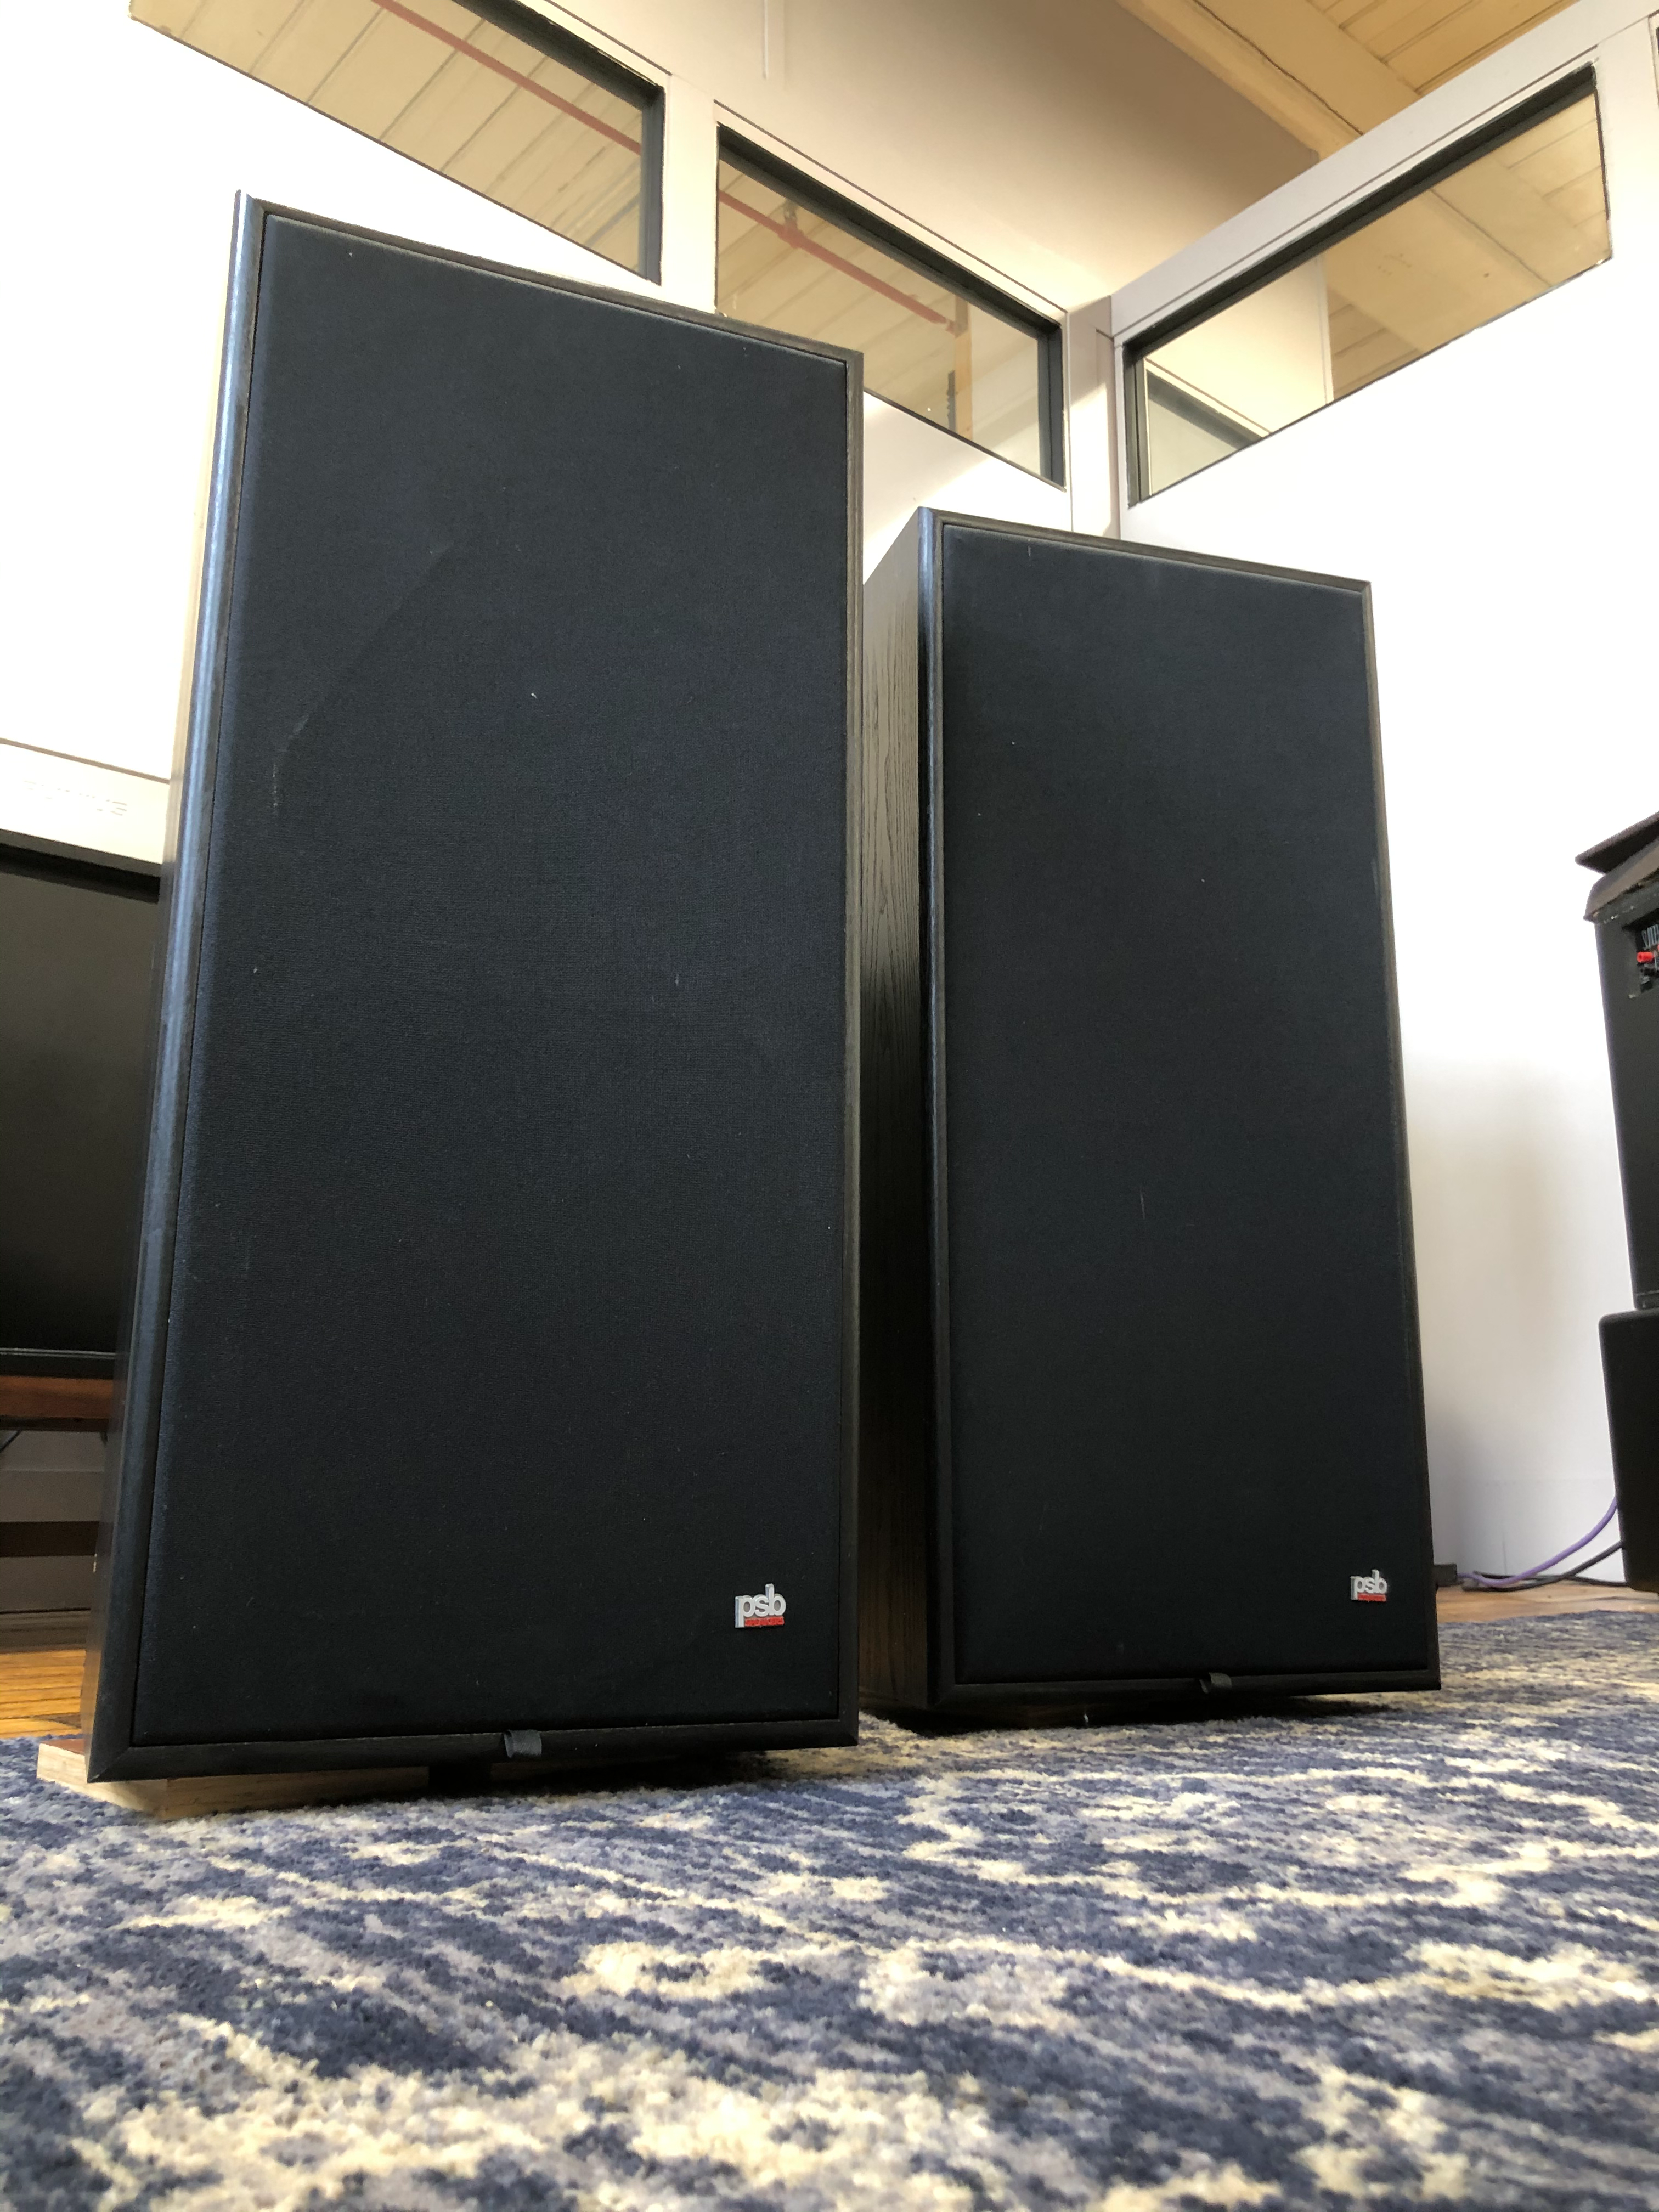 PSB 70R Vintage Loudspeakers, Top of the Line 1980s Sound - SOLD